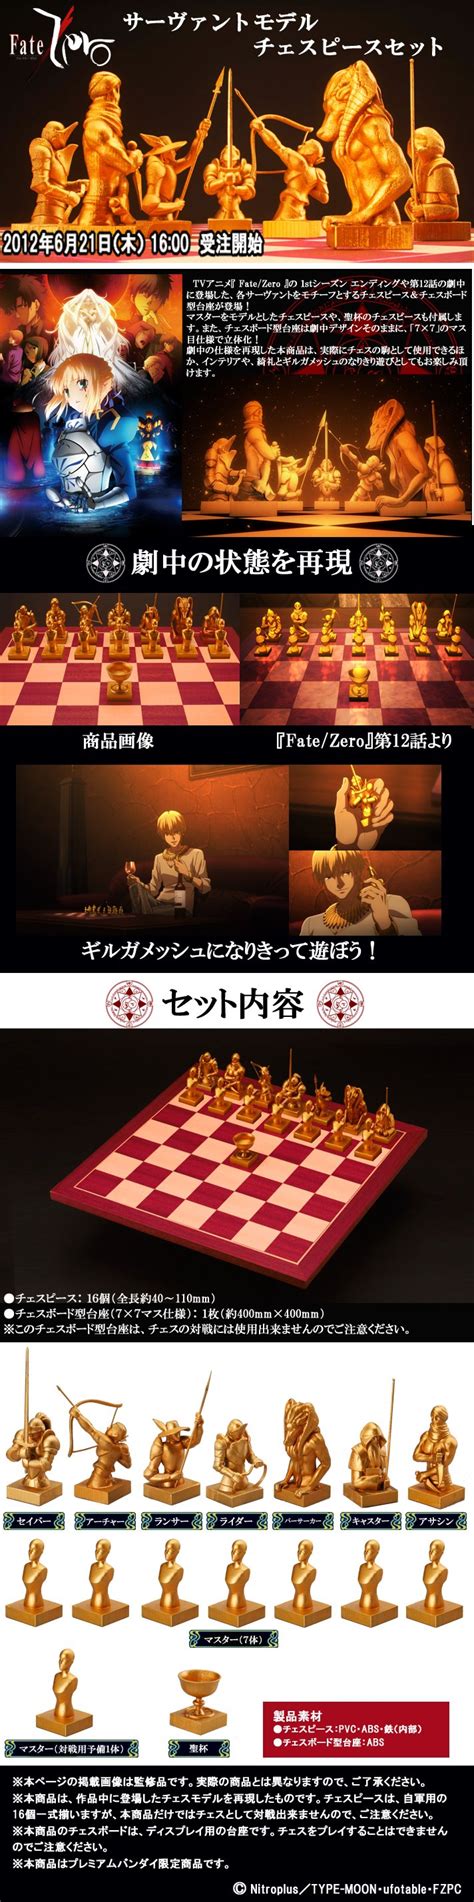 It's set in an alternate universe and timeline to fate/stay night's. New 'Fate/Zero' Inspired Chess Set to be Released | JpopAsia